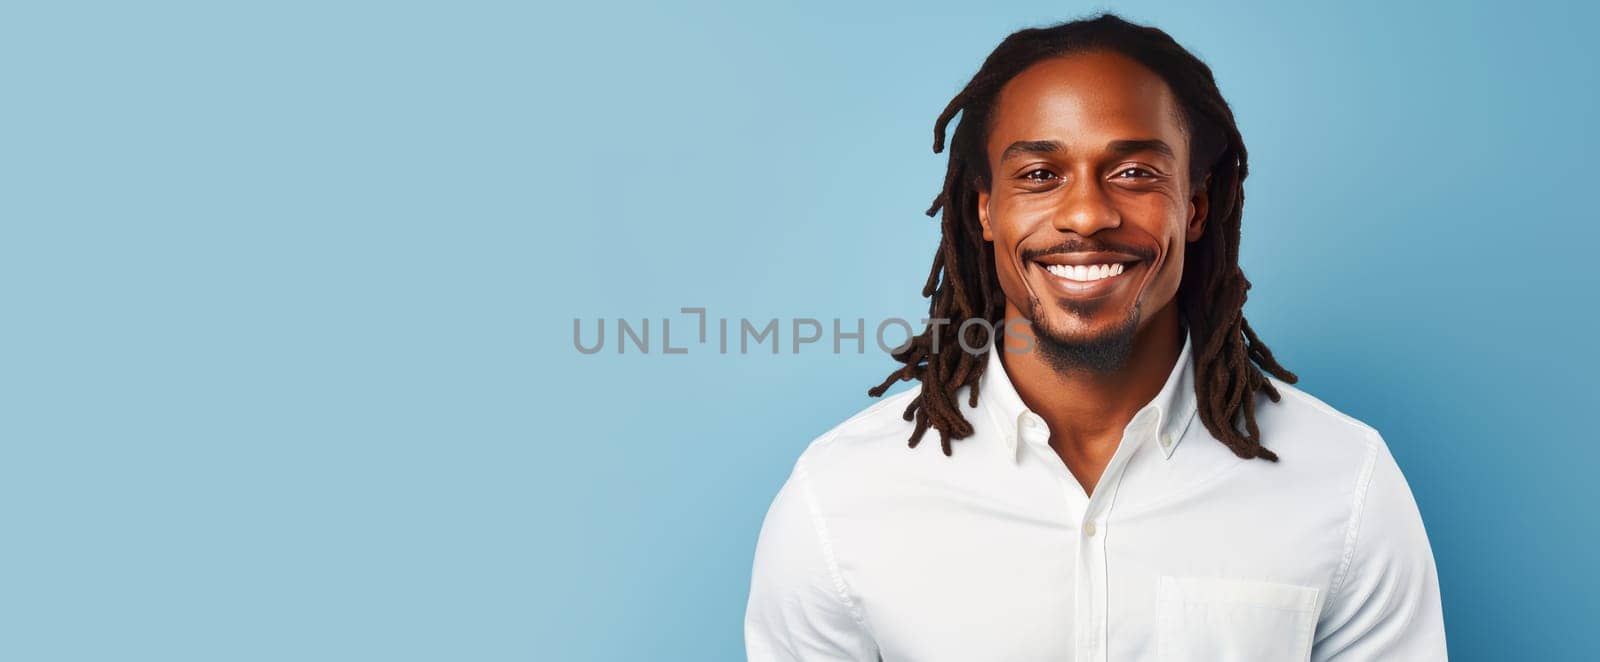 Portrait of an elegant sexy smiling African man with dark and perfect skin and long hair, on a light blue background. by Alla_Yurtayeva